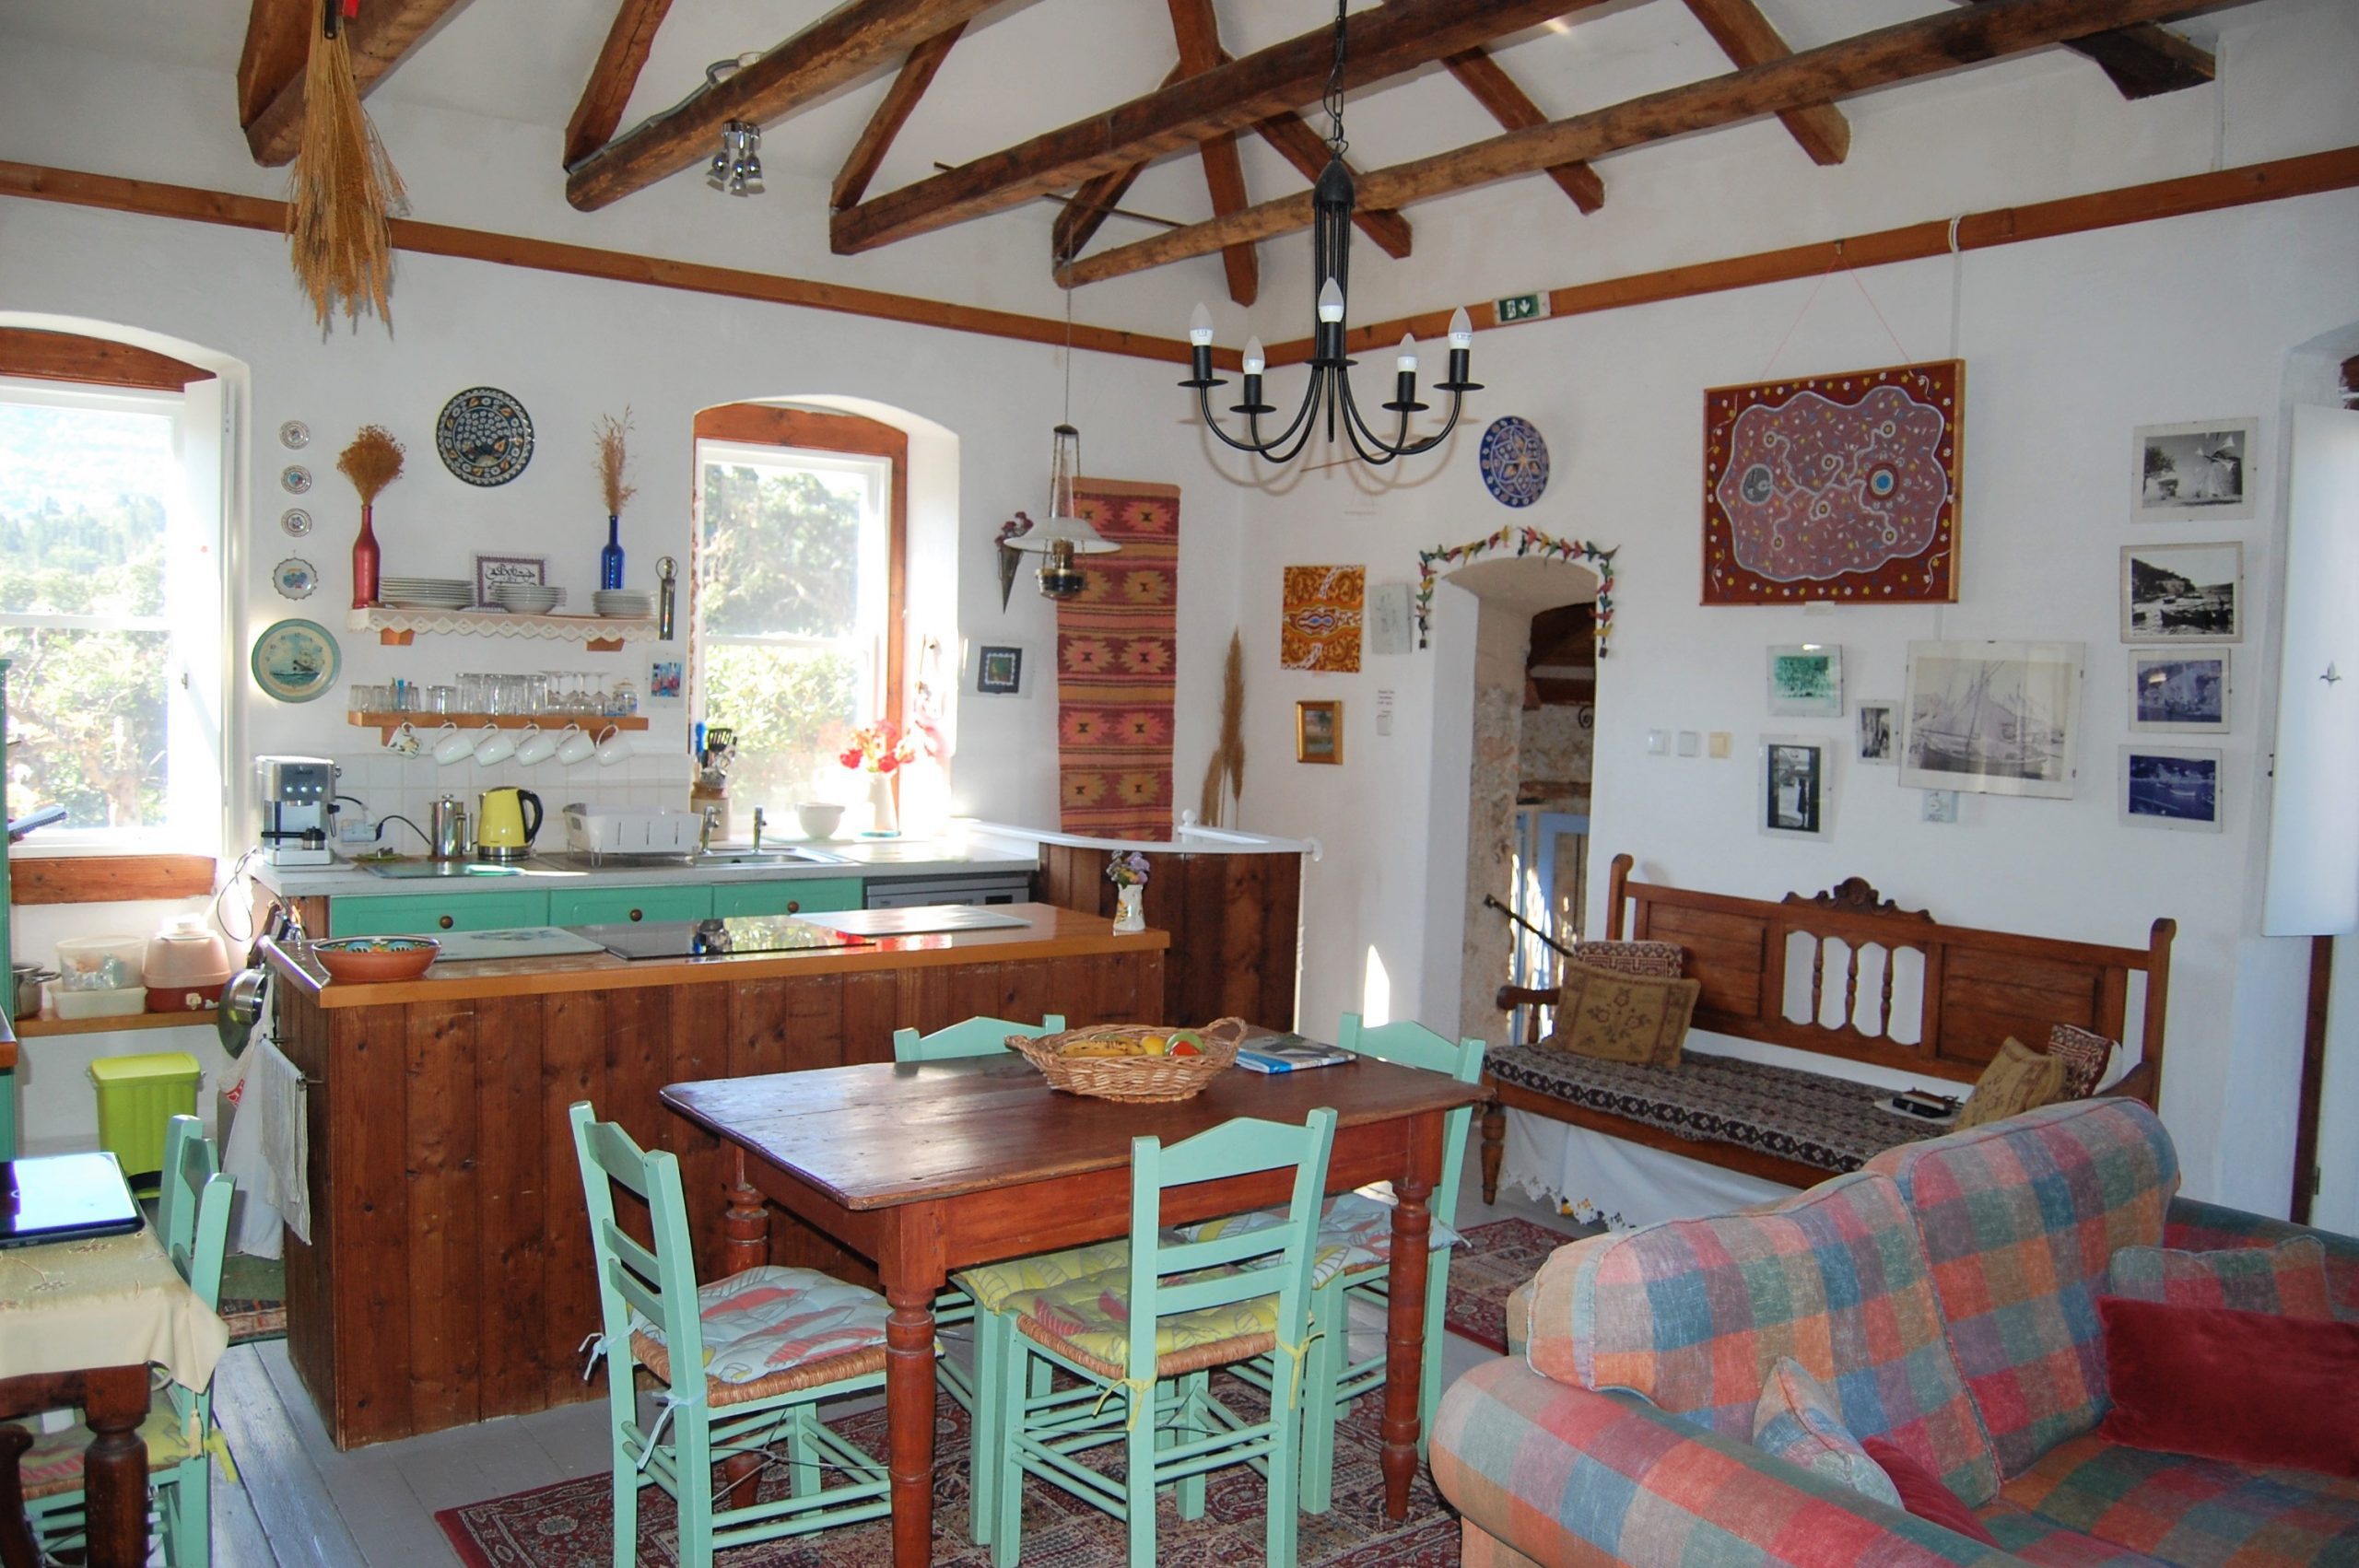 Living room / Kitchen of house for sale Ithaca Greece, Lahos